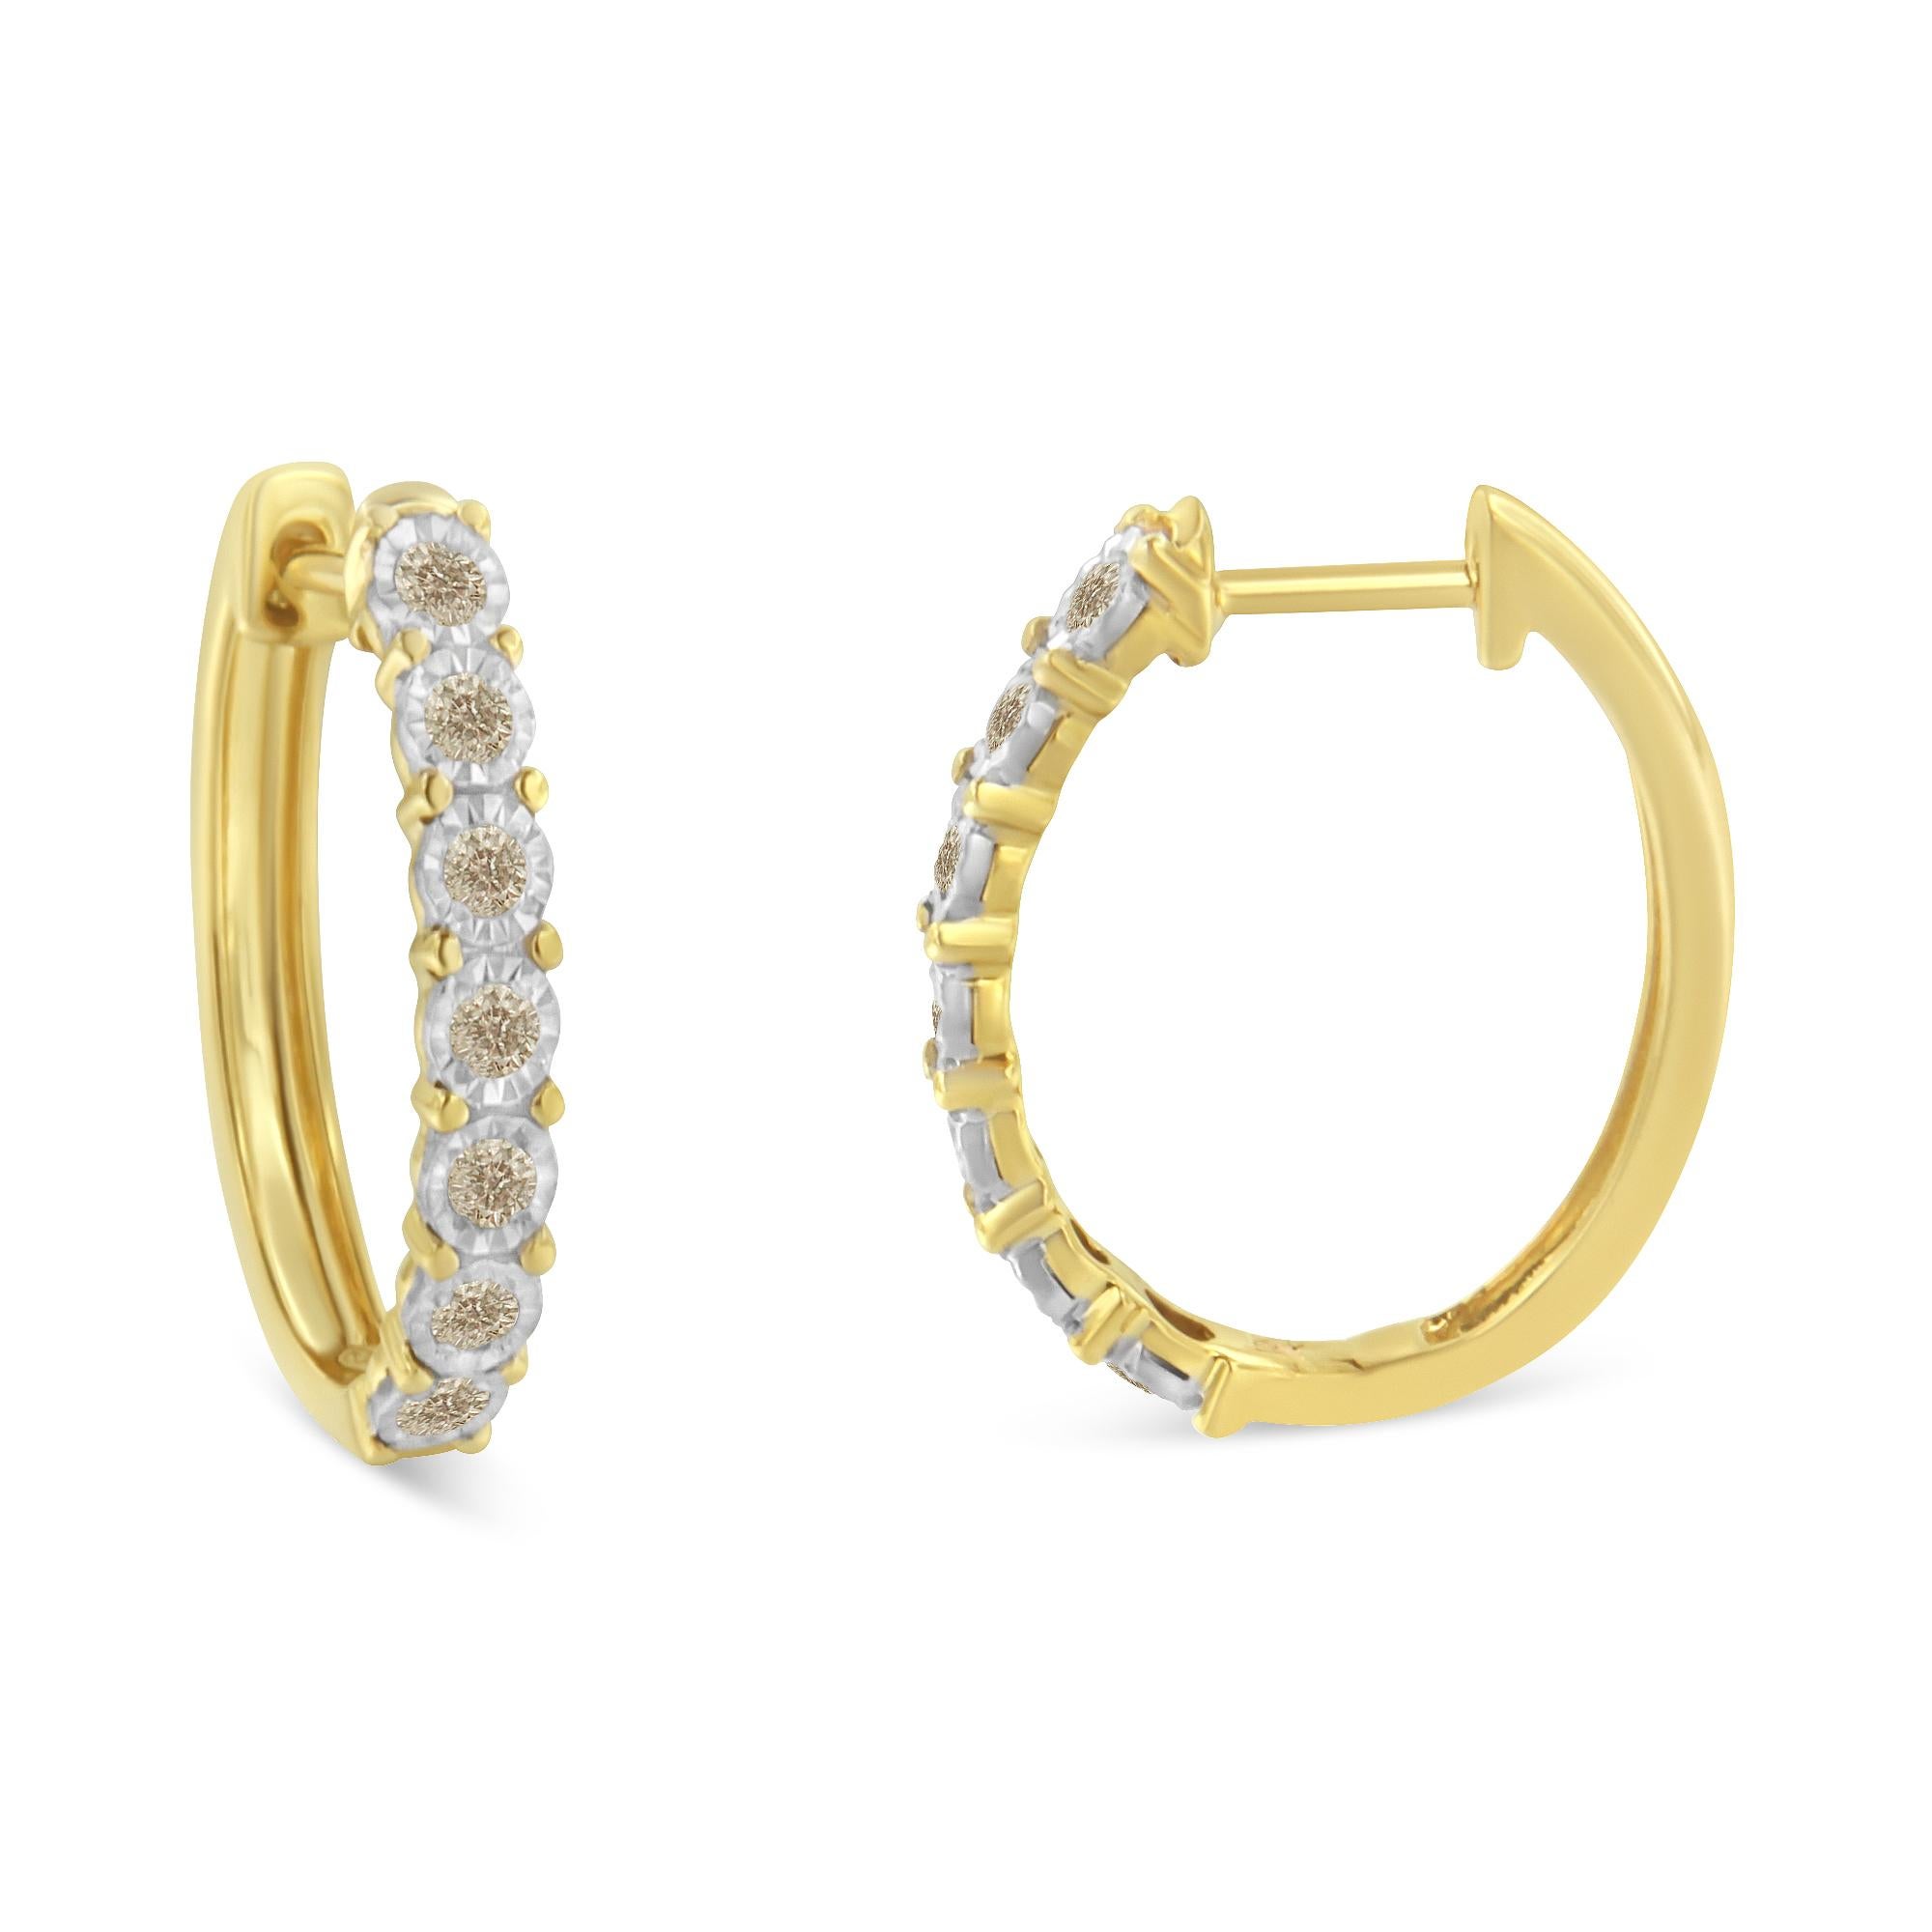 This pair of hoop earrings features shimmering diamonds set in 10 karat two-tone gold. Each earring has seven round diamonds set in a miracle setting to enhance their brilliance. The total diamond weight is .50 carats. They are built with leverback